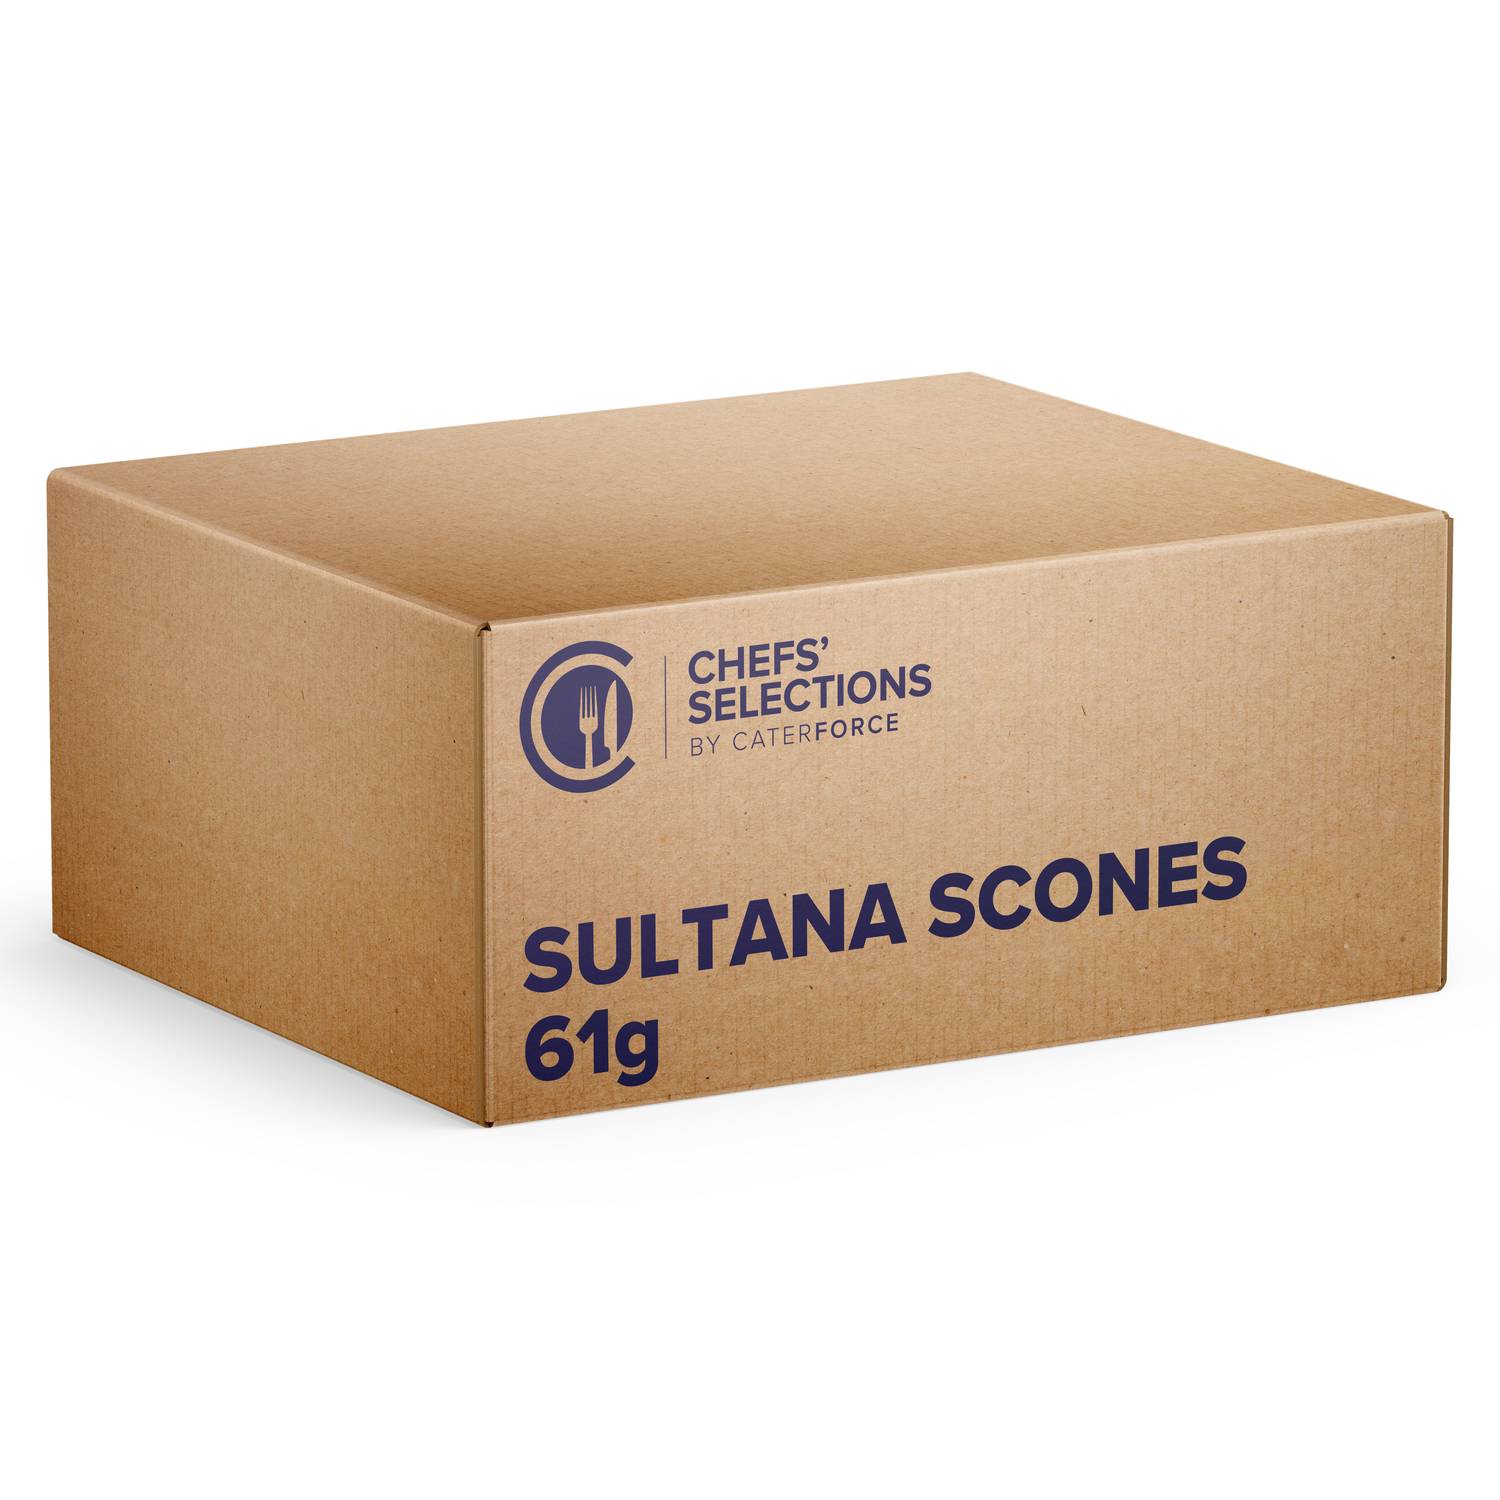 Chefs’ Selections Sultana Scones (50 x 61g)